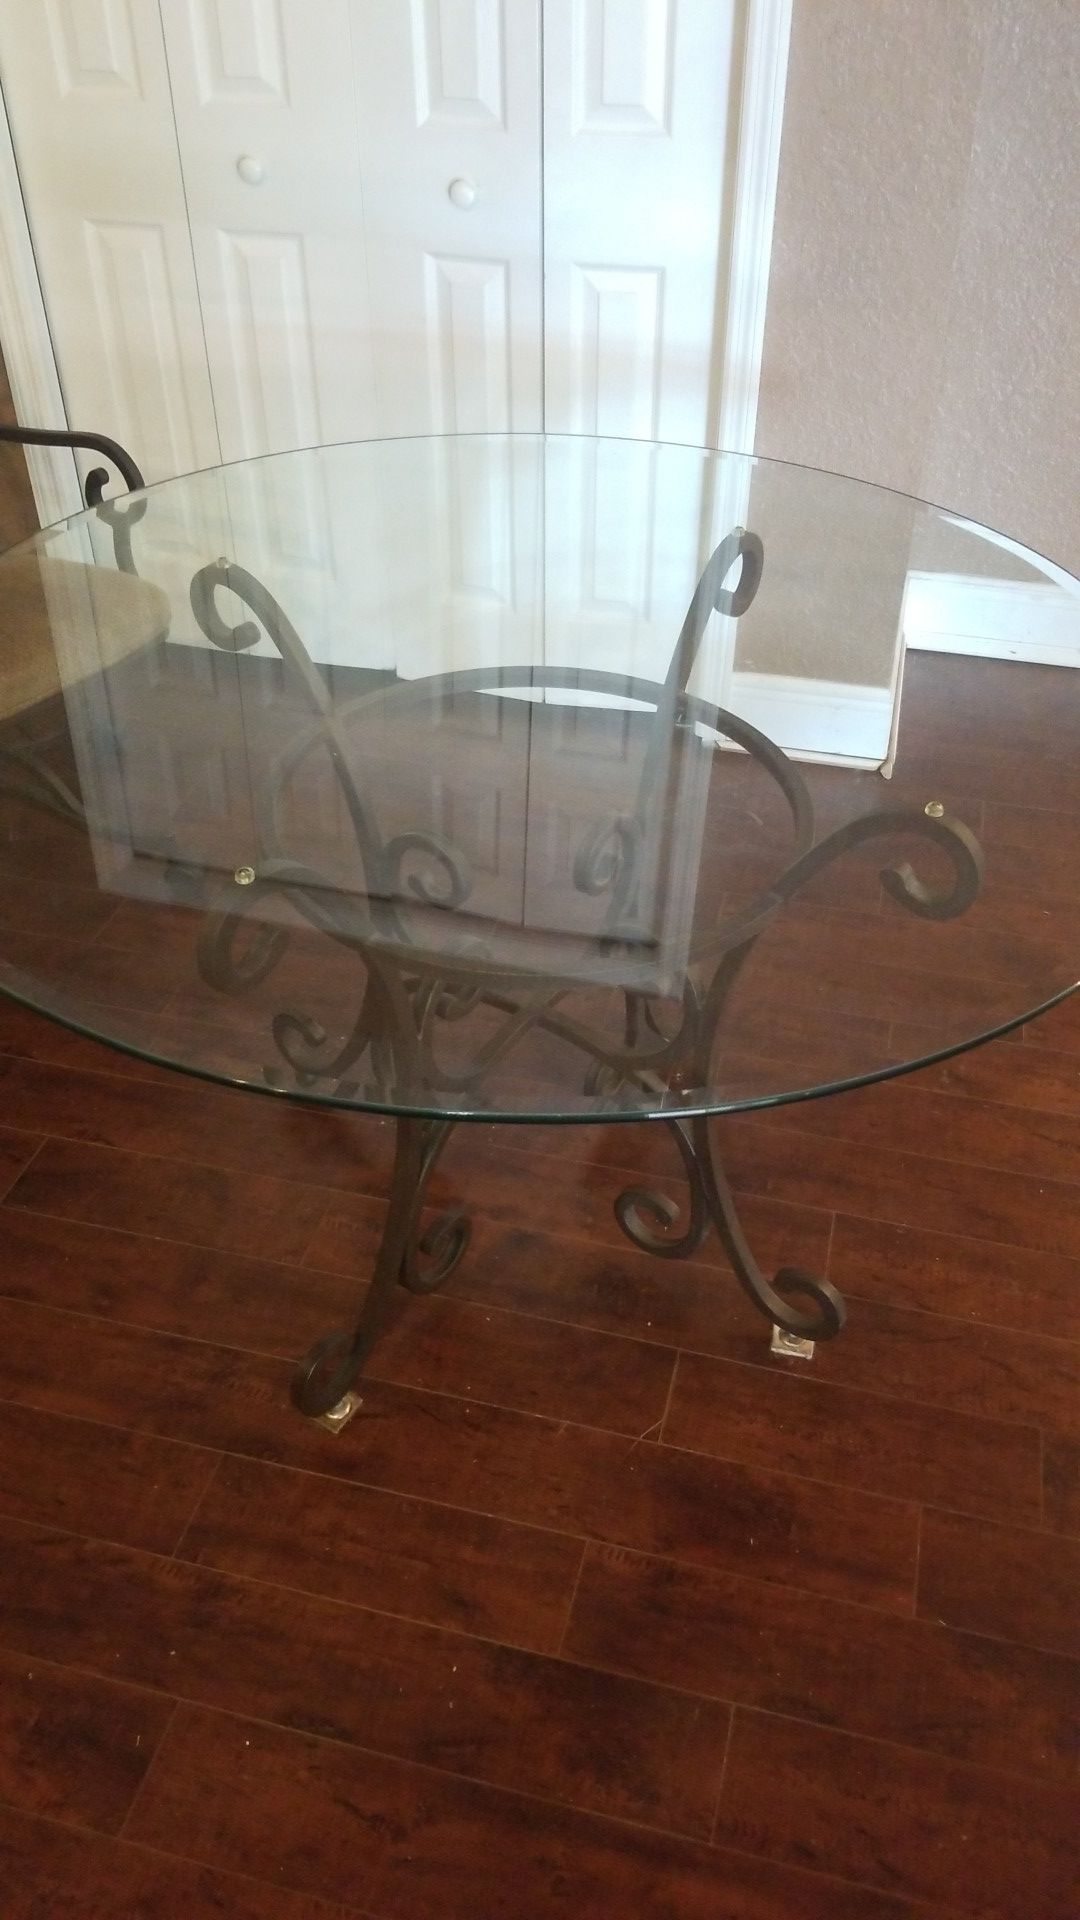 48" Round glass kitchen table and 4 chairs